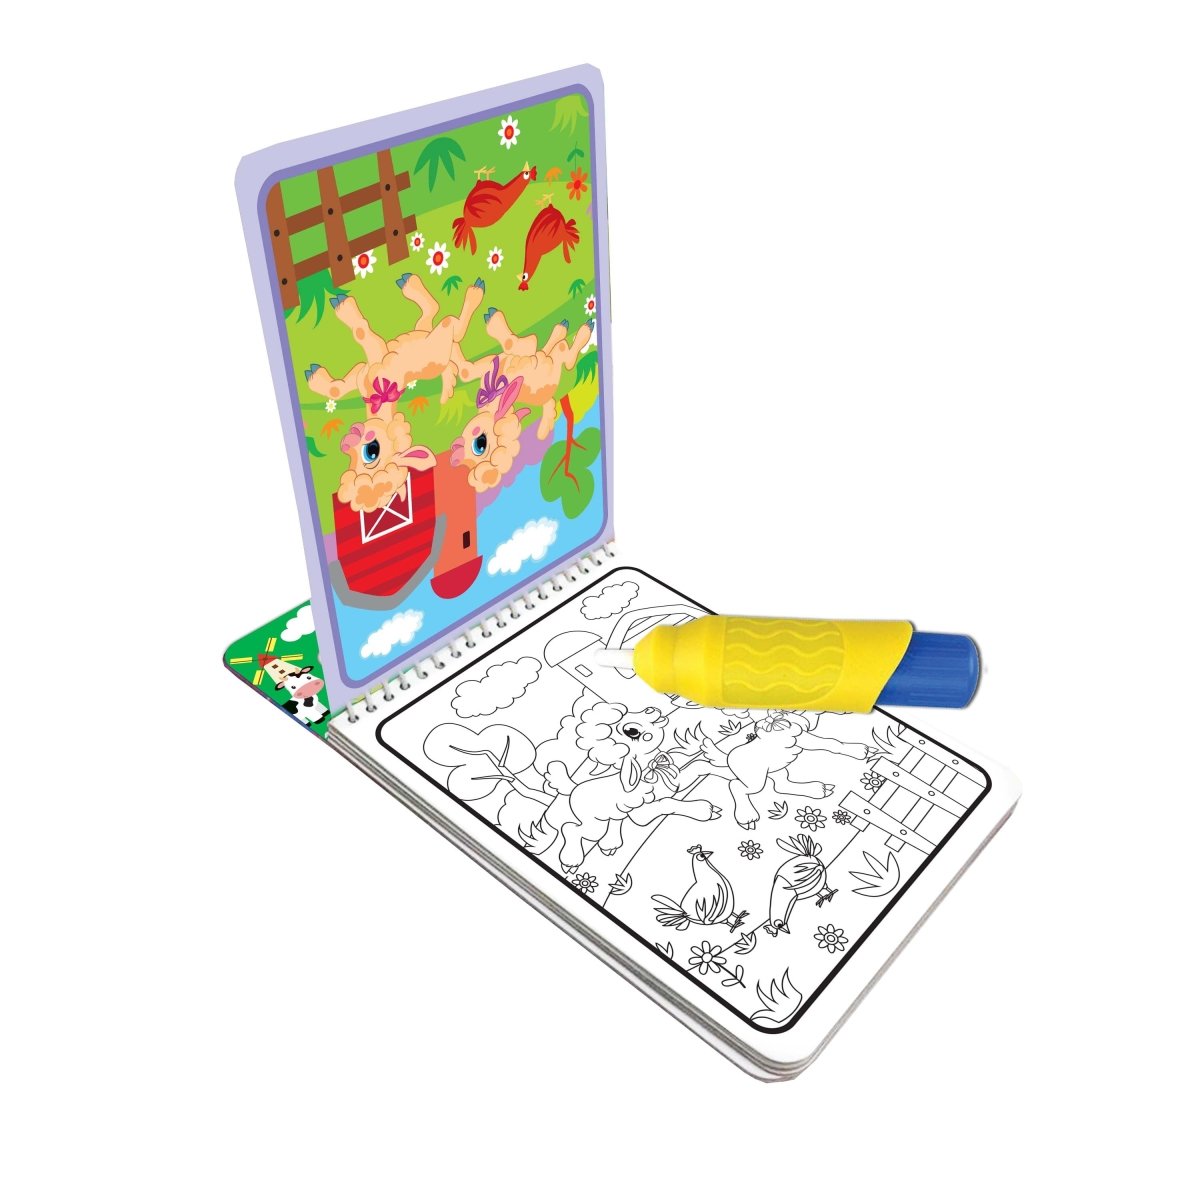 Dreamland Publications Water Magic Farm Animals- With Water Pen- Use Over And Over Again - 9789389281996